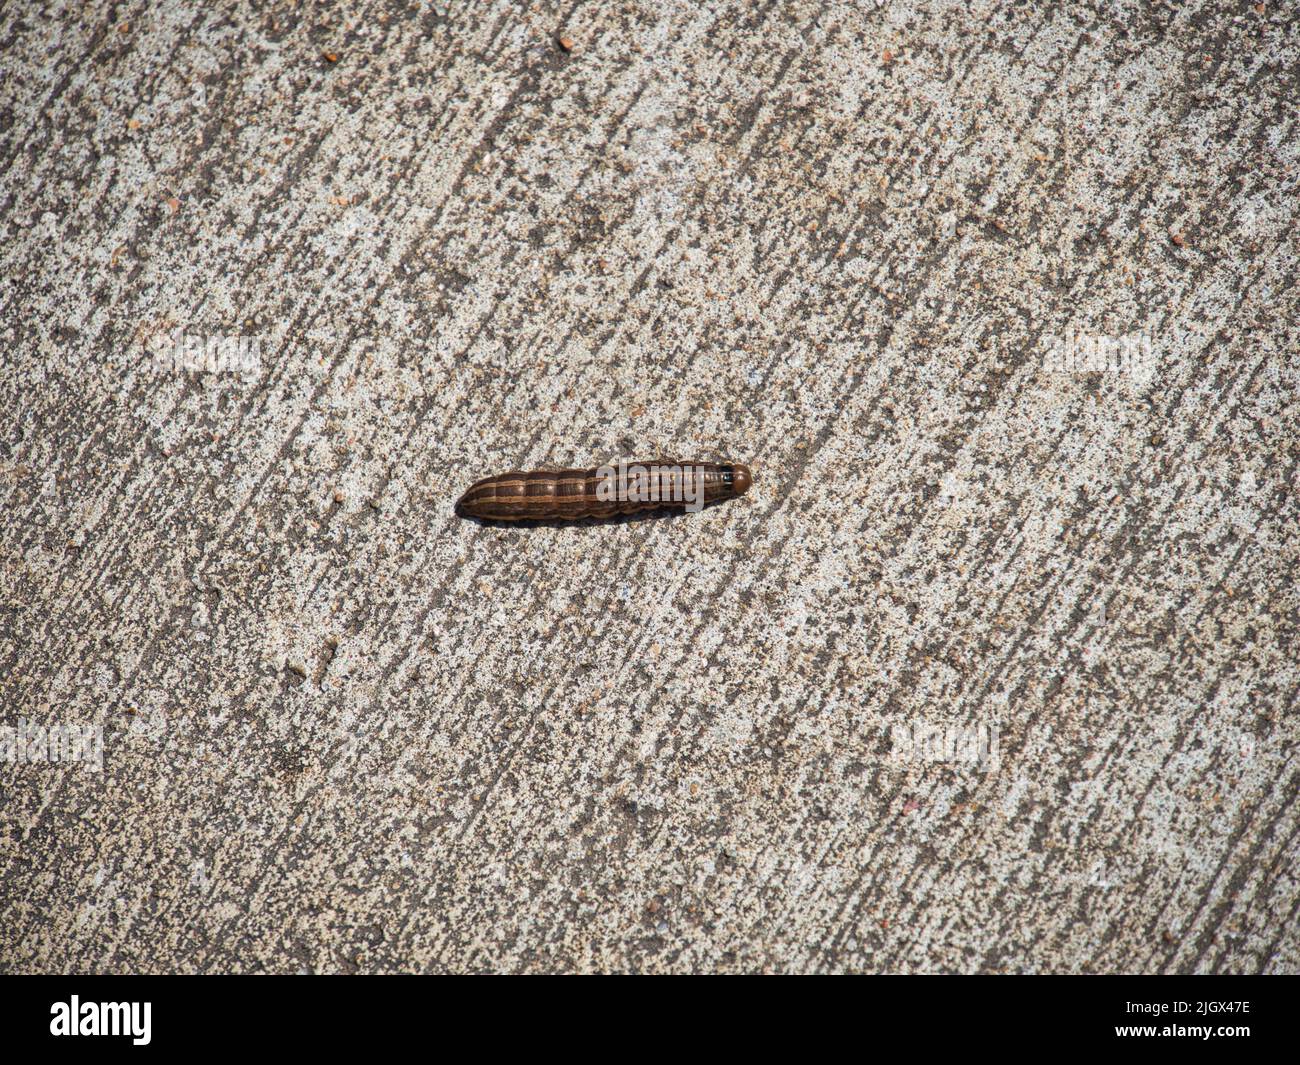 A closeup of an army cutworm on the ground Stock Photo